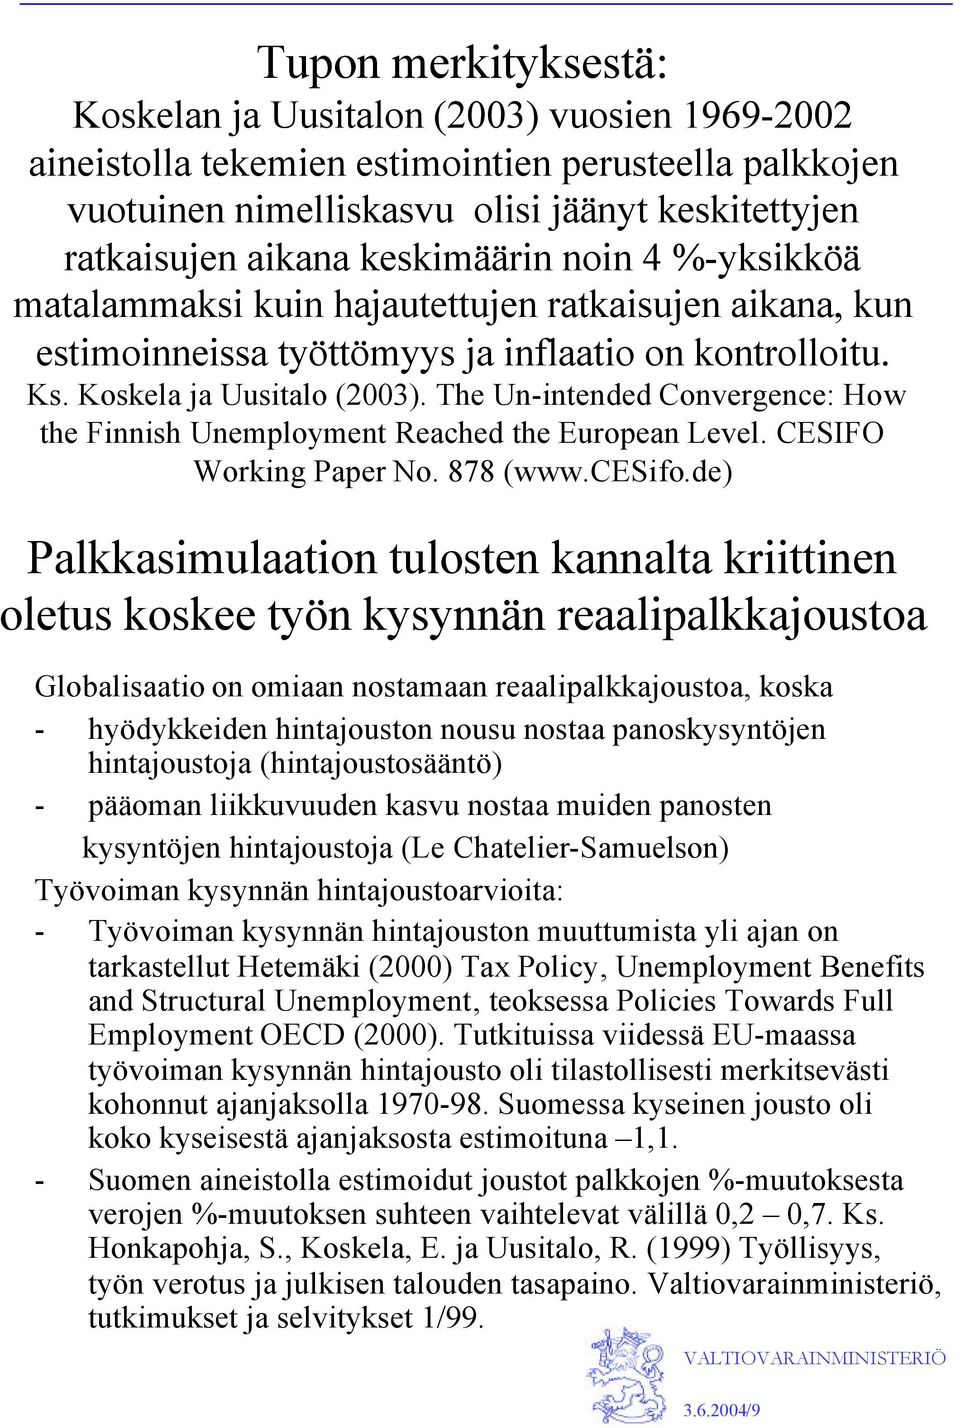 The Un-intended Convergence: How the Finnish Unemployment Reached the European Level. CESIFO Working Paper No. 878 (www.cesifo.